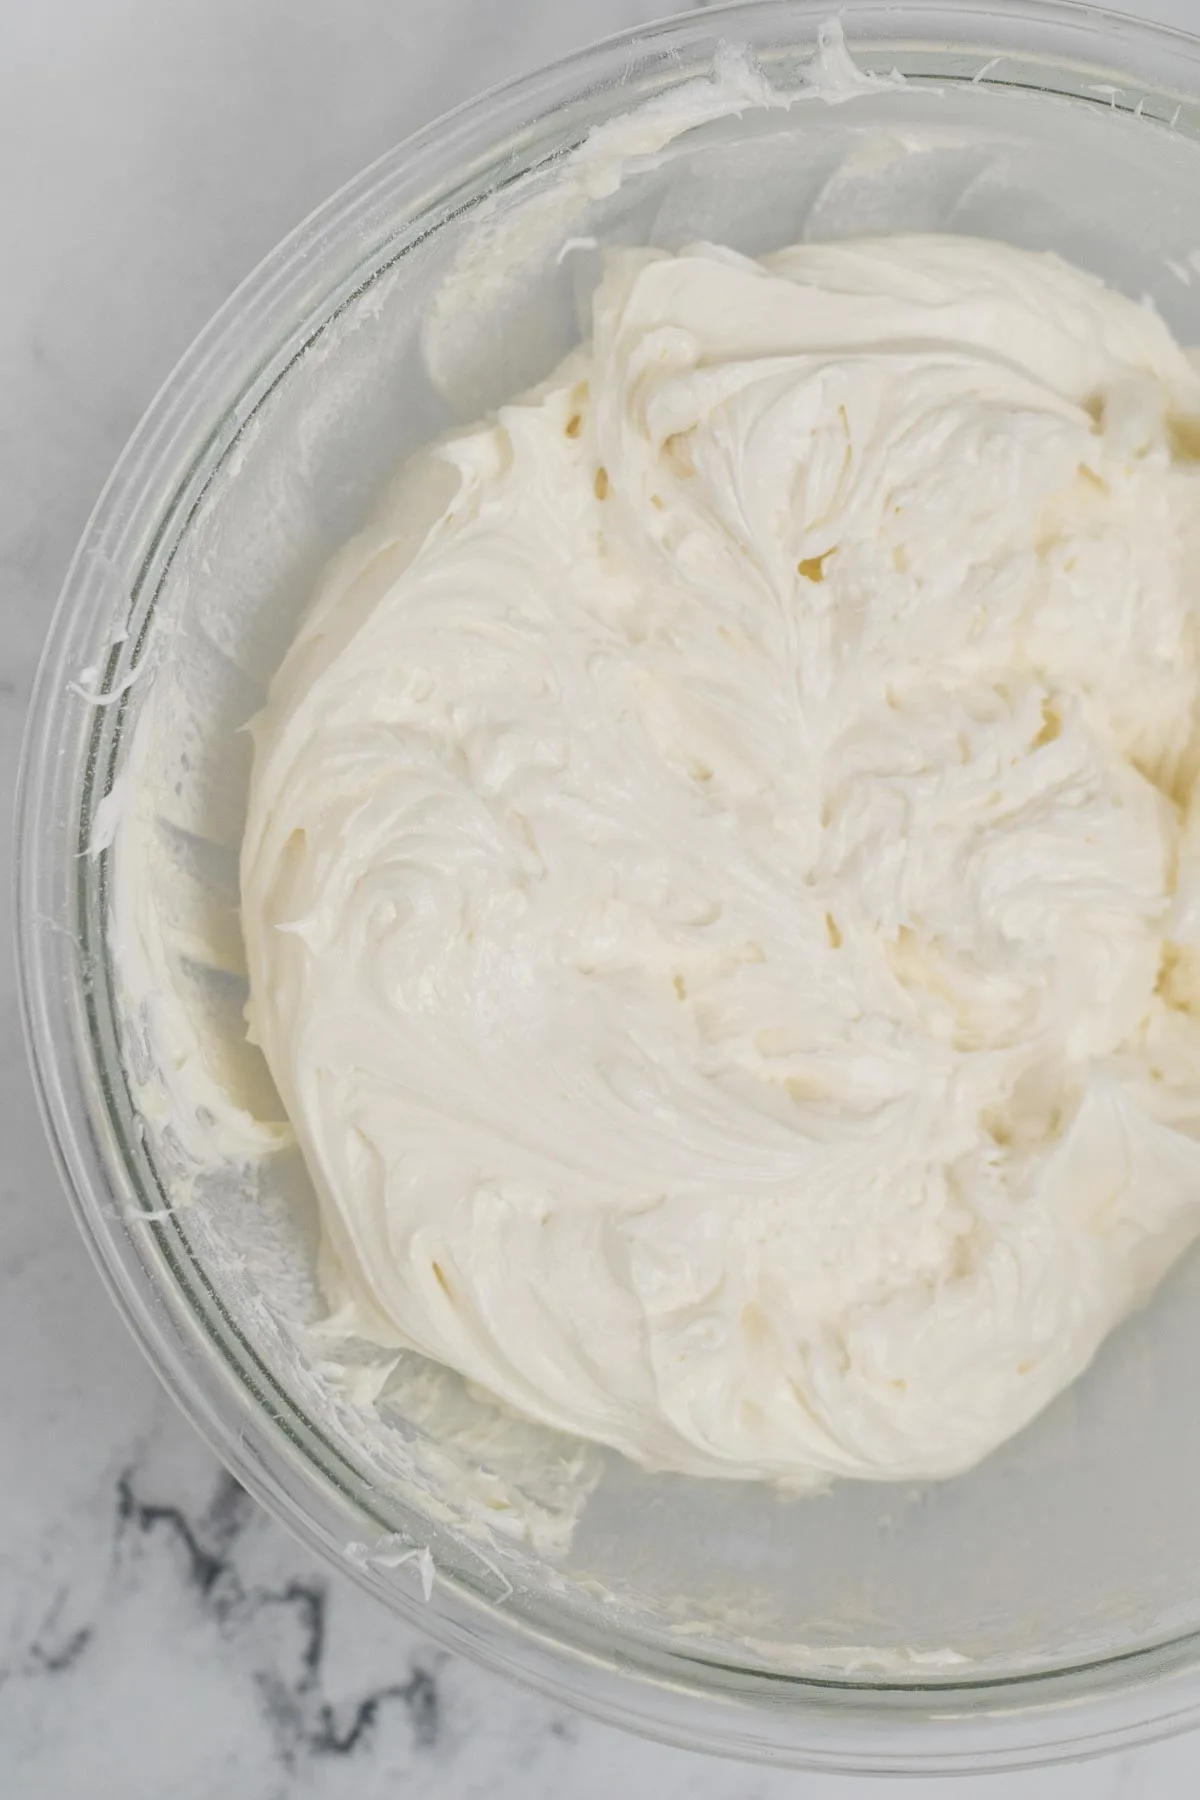 Cream cheese icing in a bowl.